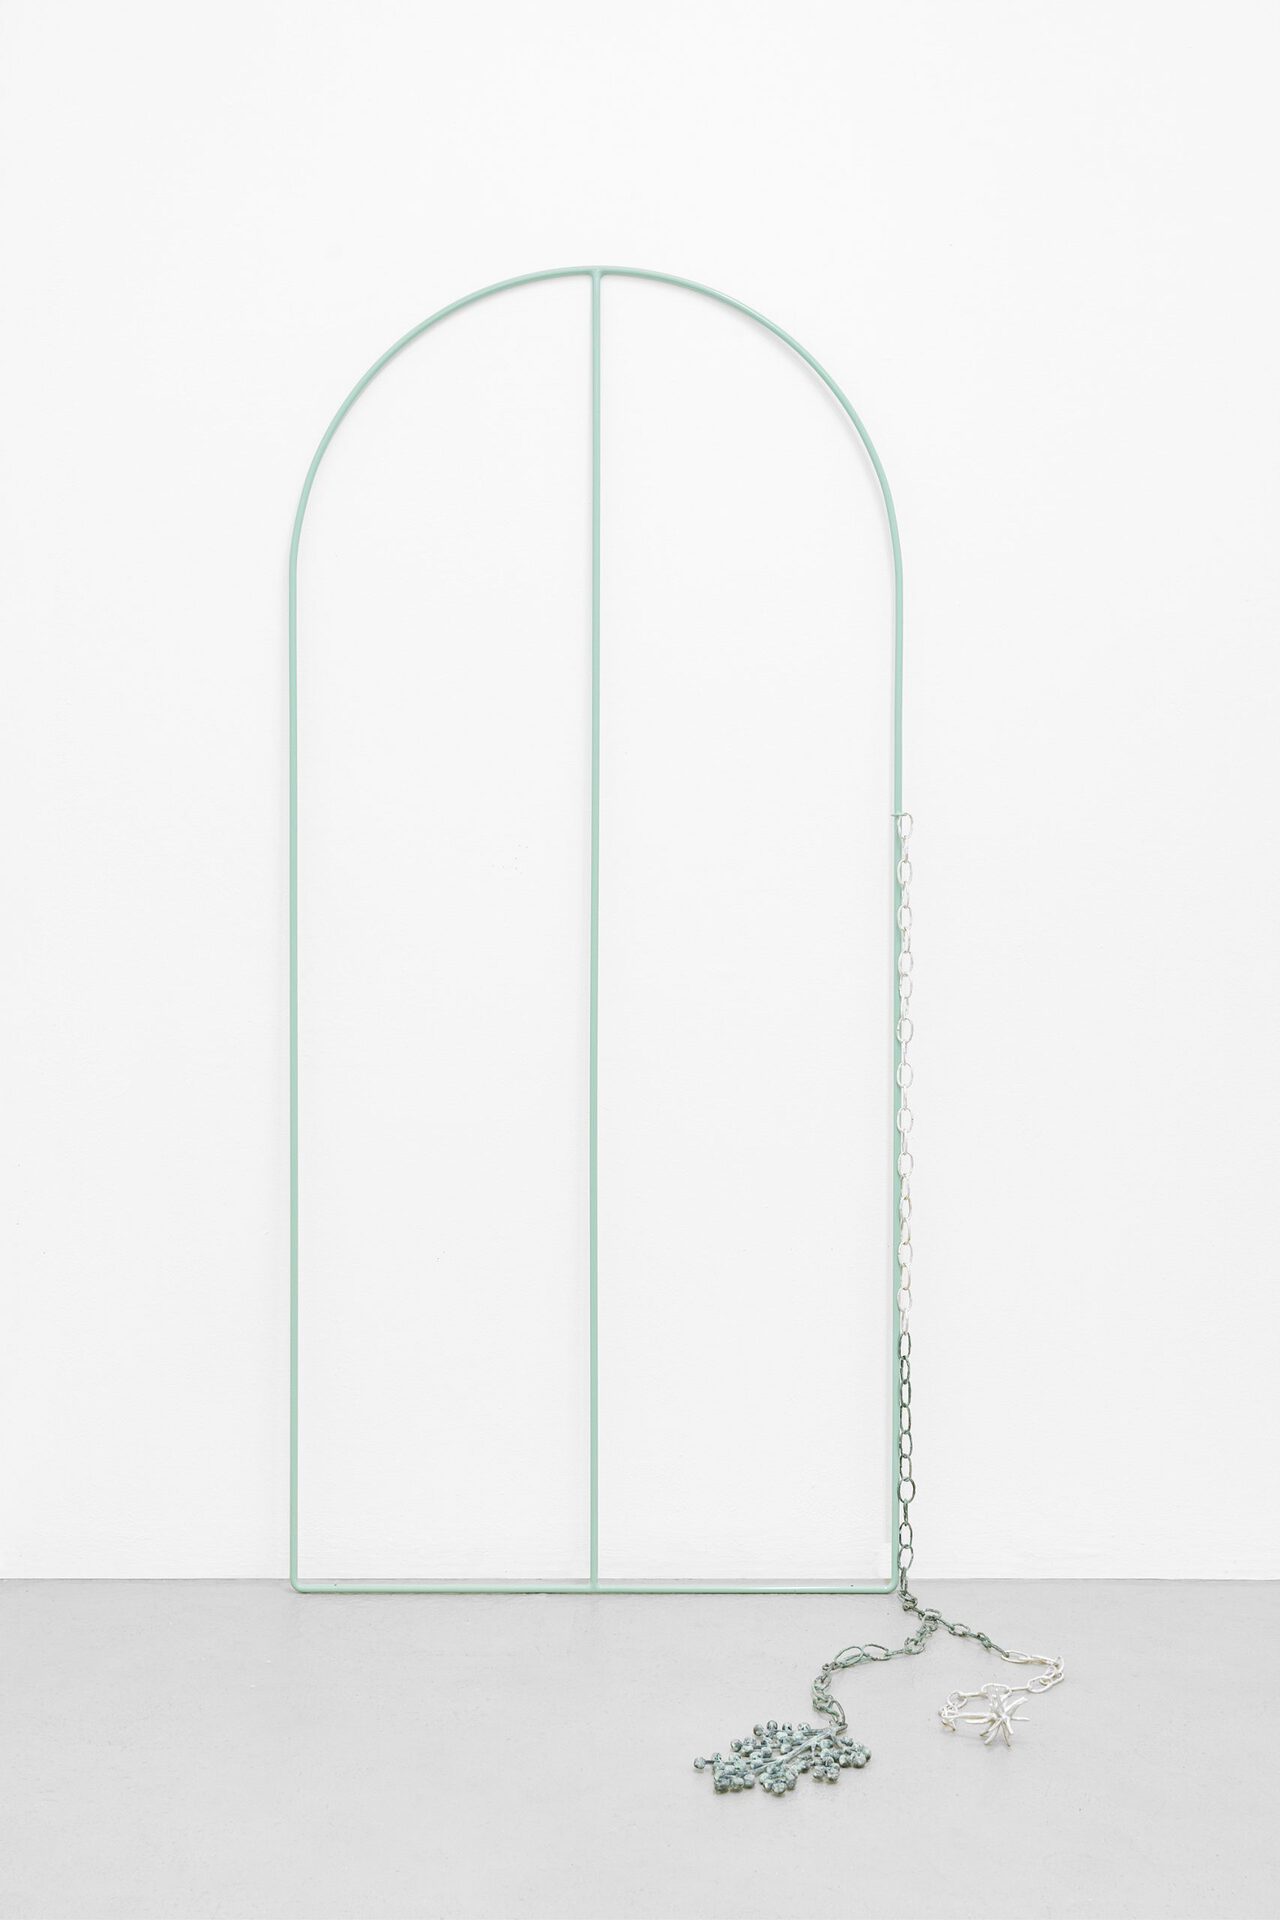 Marie-Michelle Deschamps, Company #4, 2022 powdercoated steel, cast sterling silver, patinated cast bronze 225 cm x 98 cm